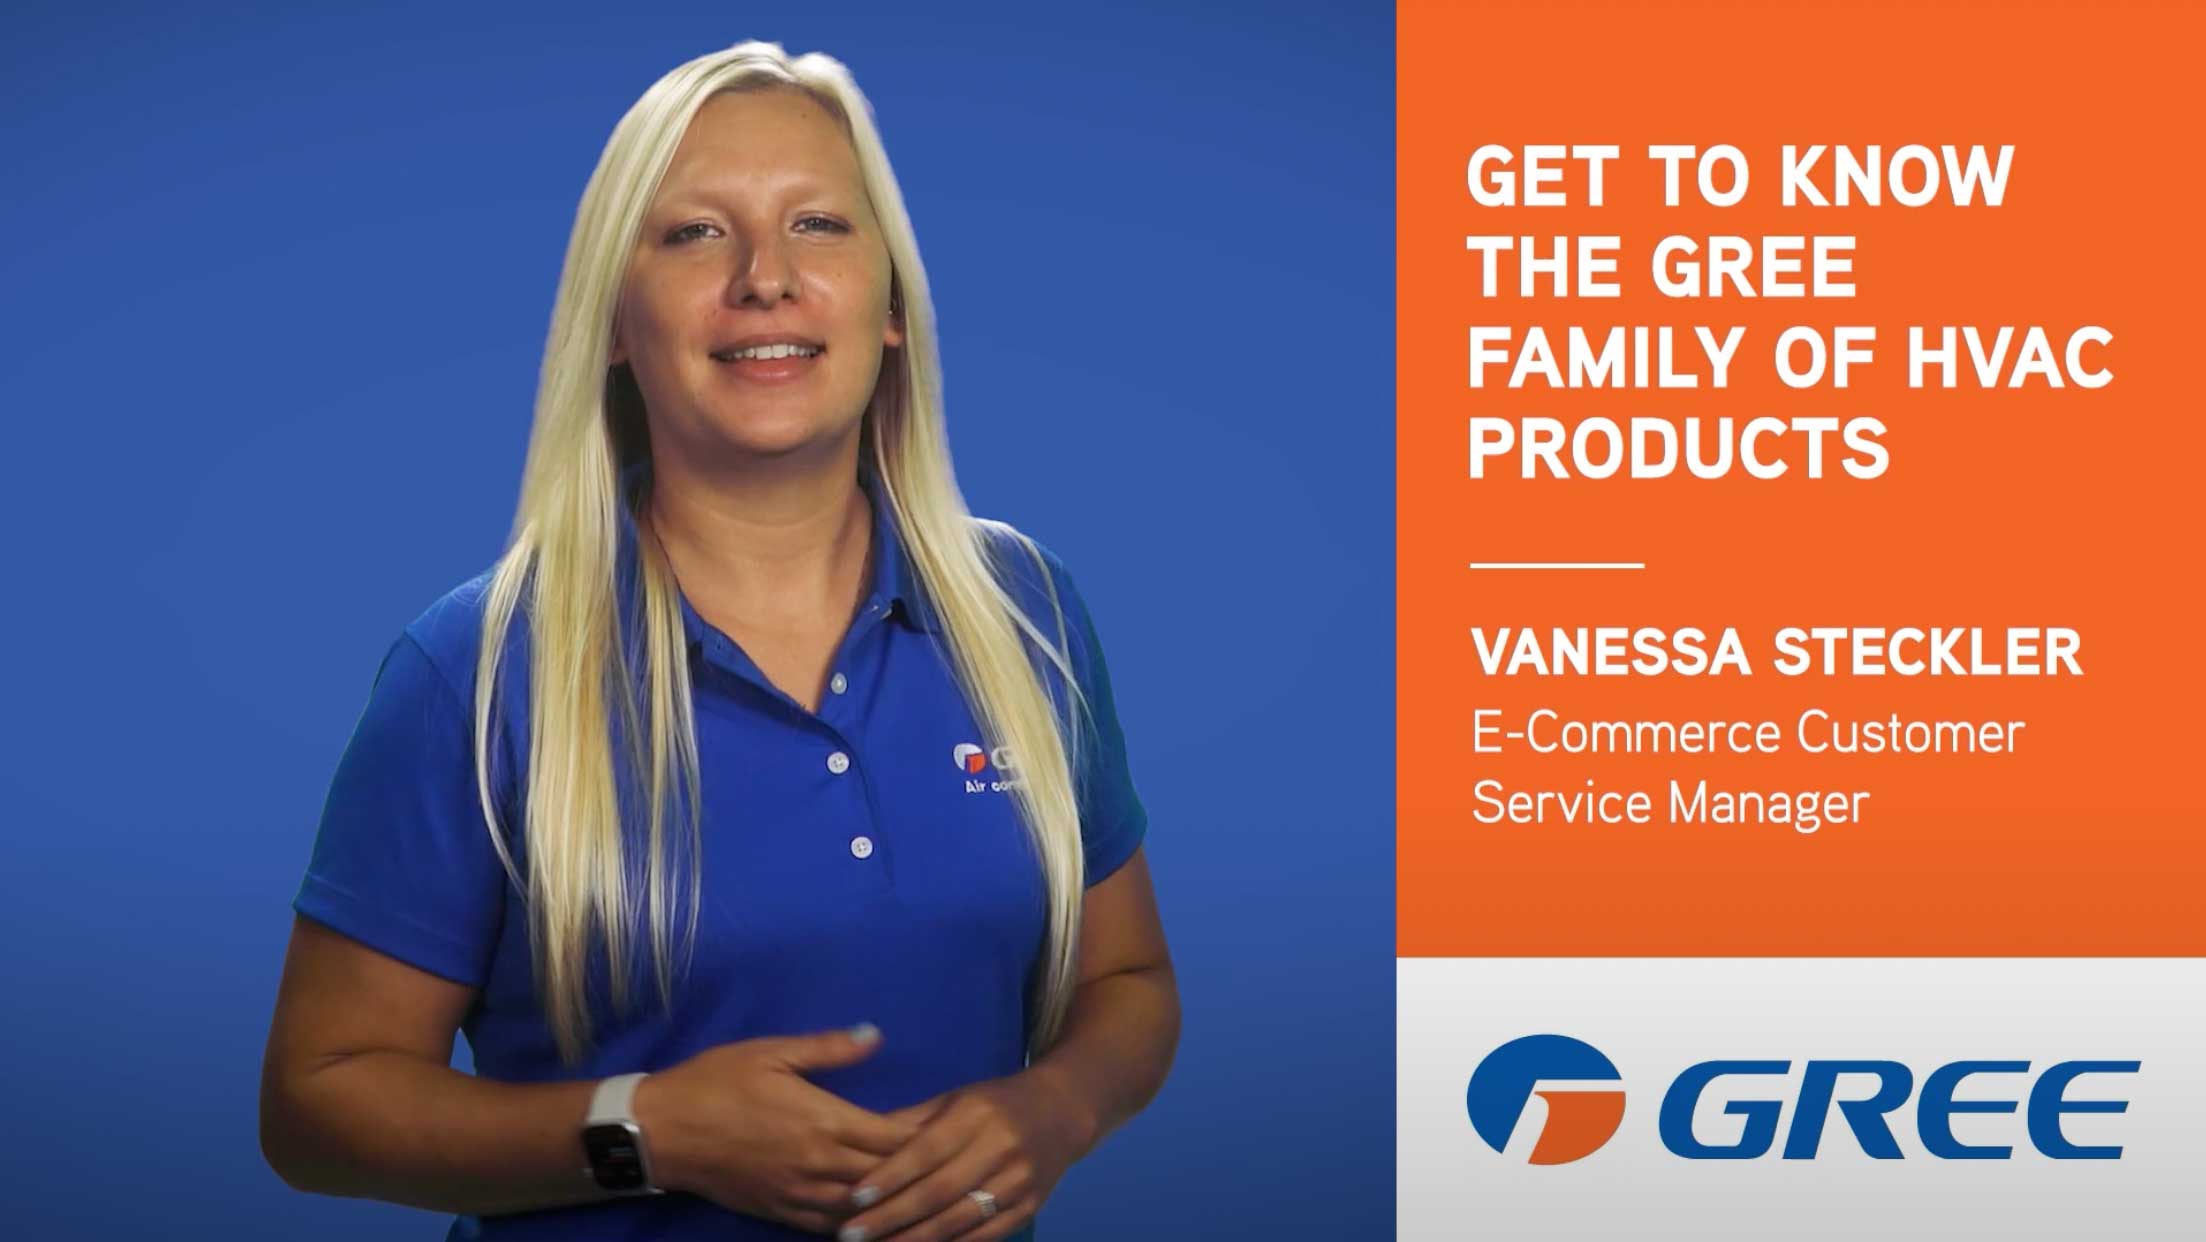 The GREE HVAC Product Family